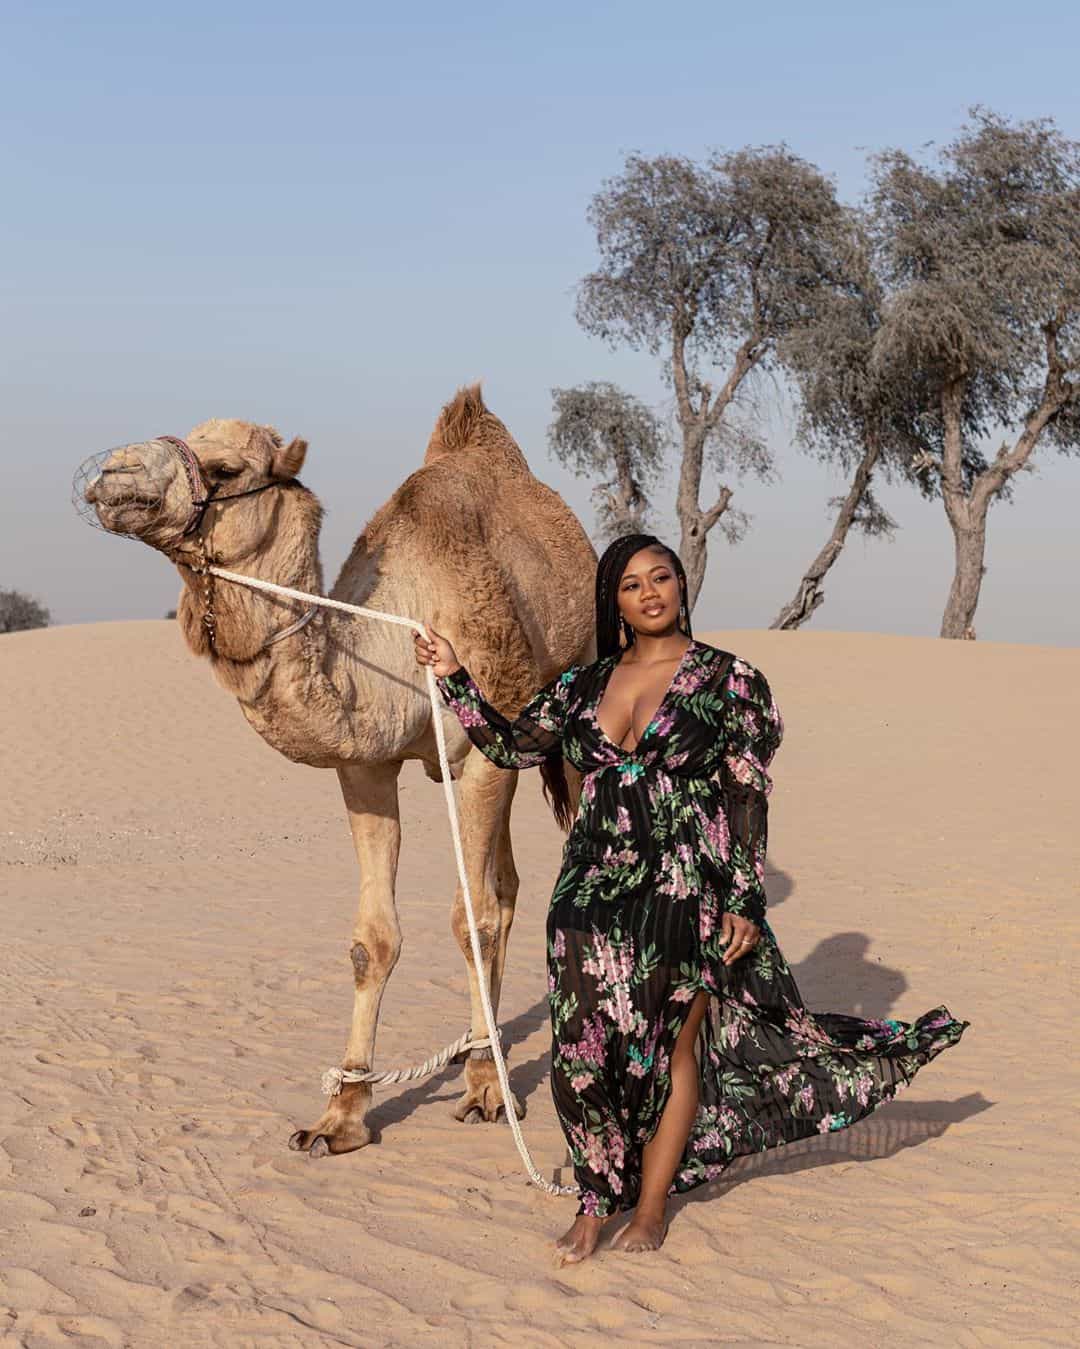 Top 14 Instagram Spots in Dubai for Photoshooting